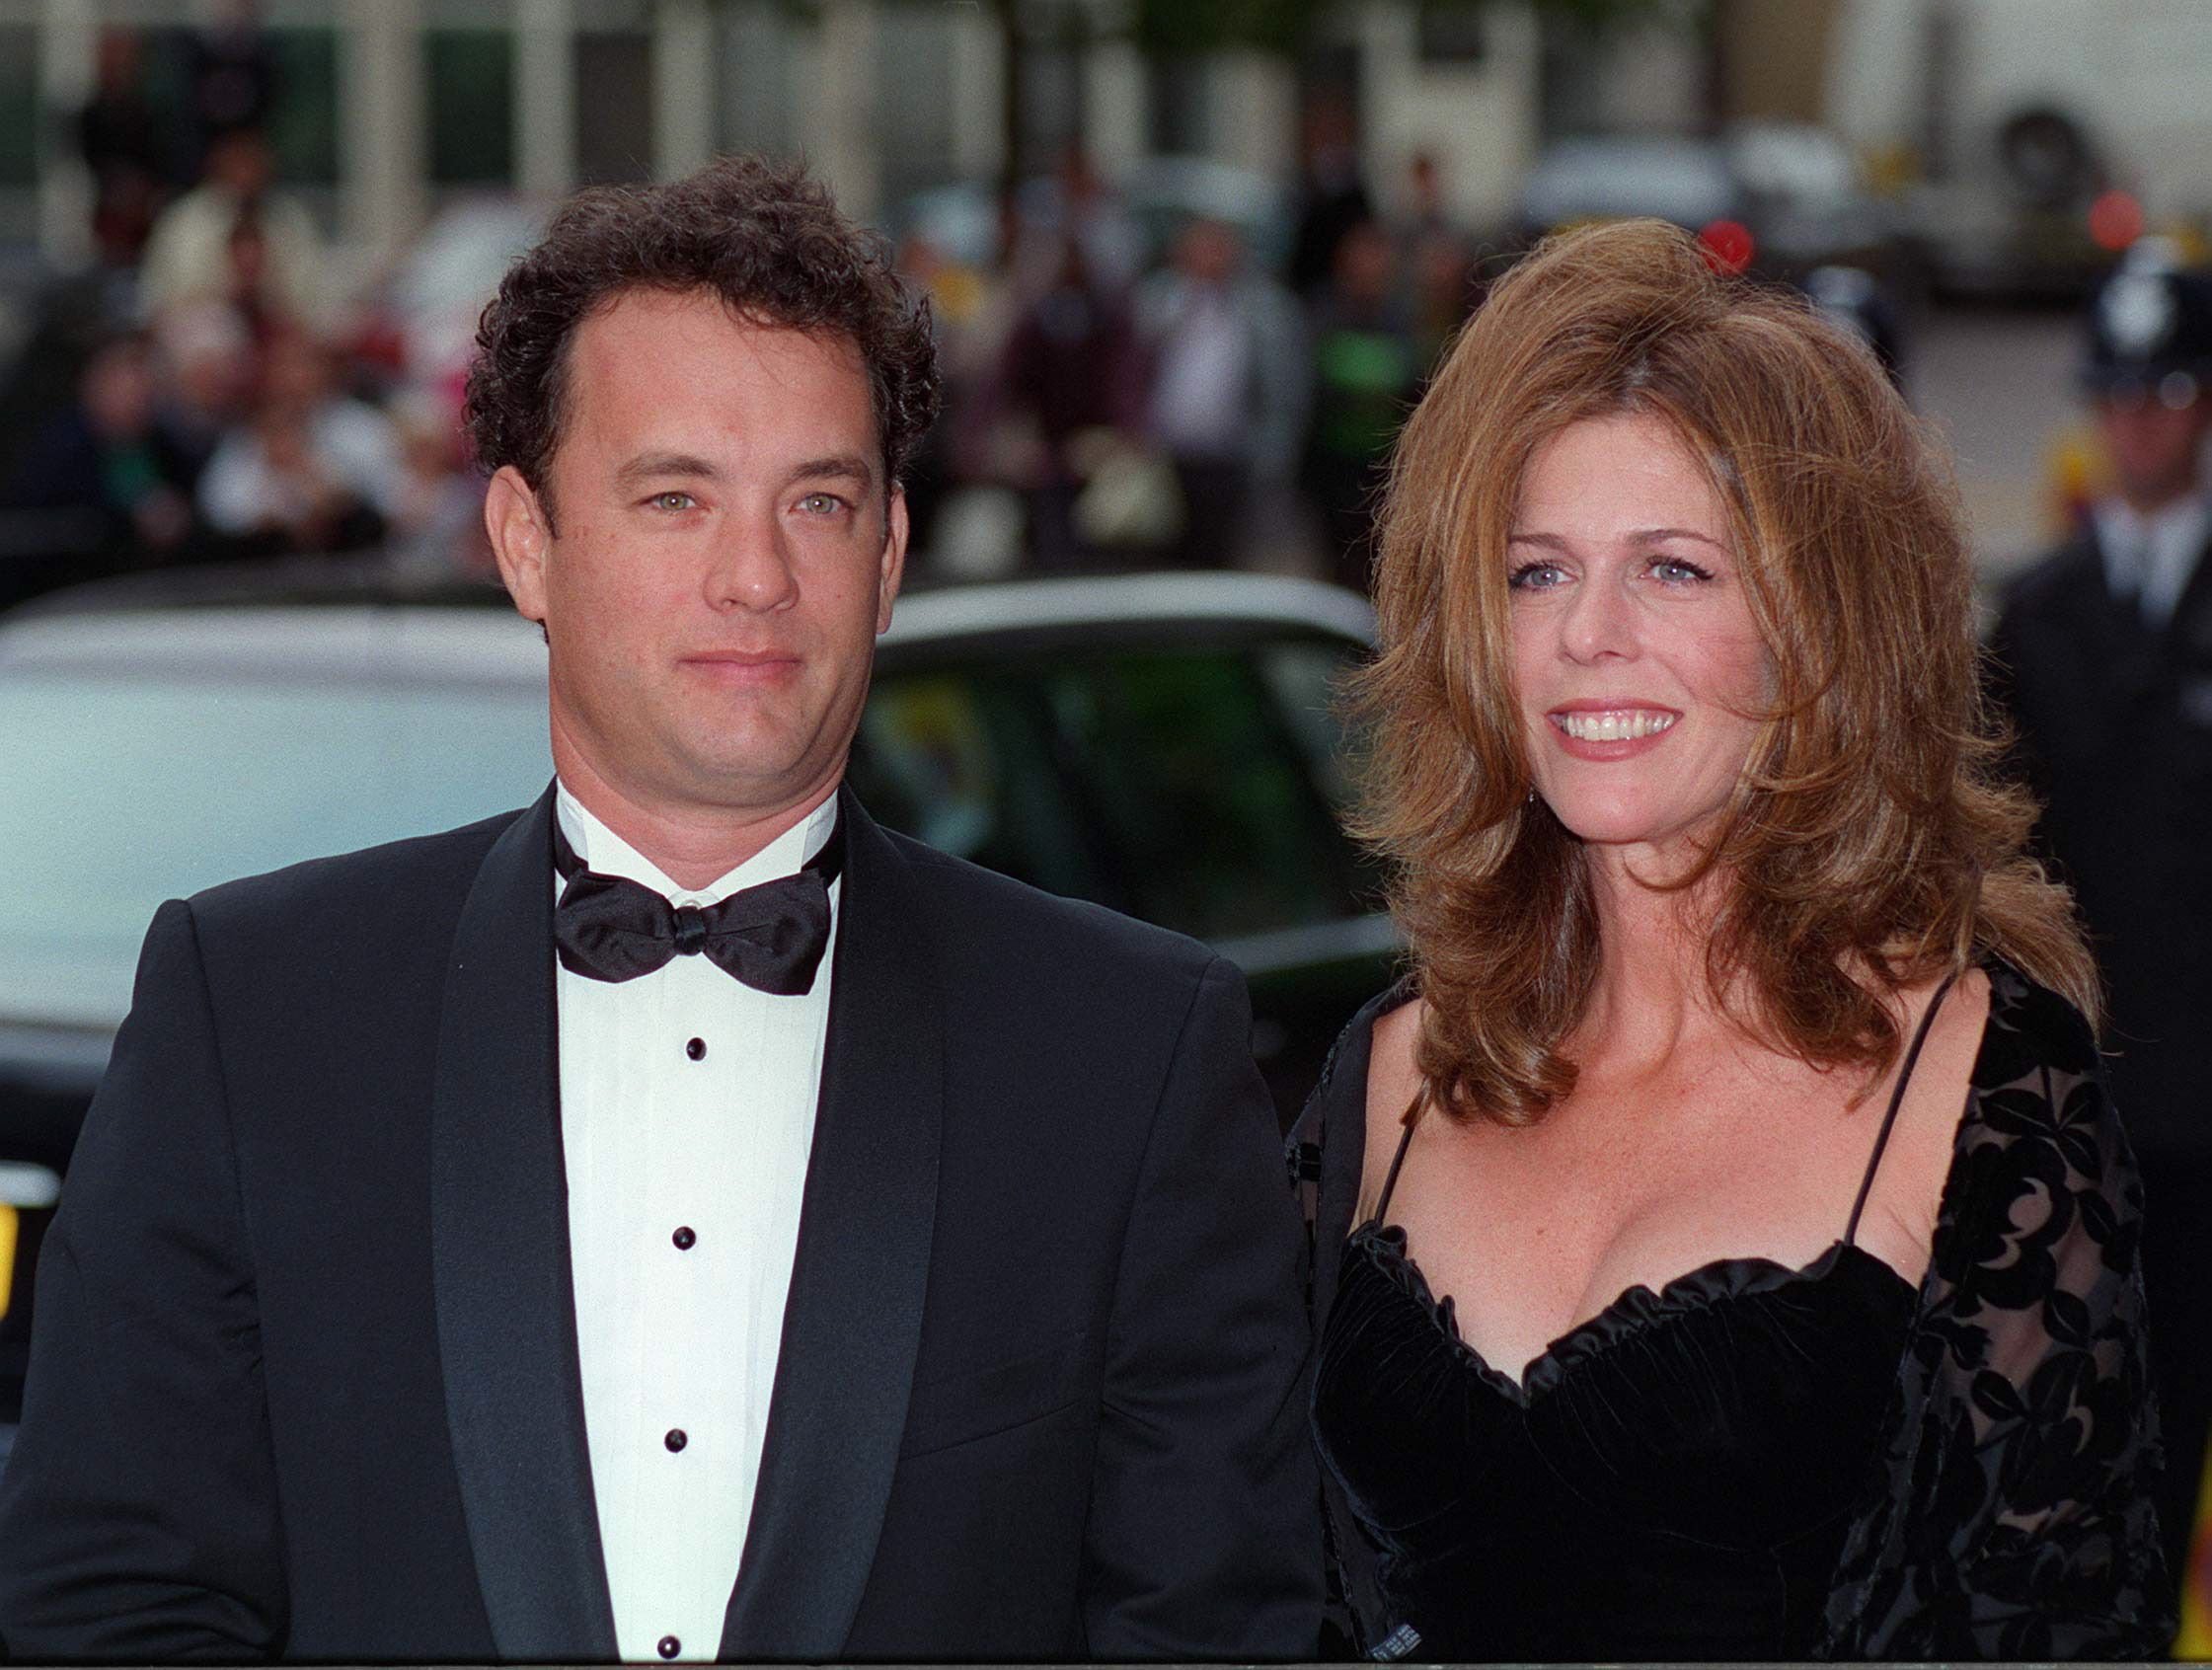 Tom Hanks and his wife, Rita Wilson, at the film preview of "Apollo 13" in London on September 7, 1995 | Photo: Getty Images